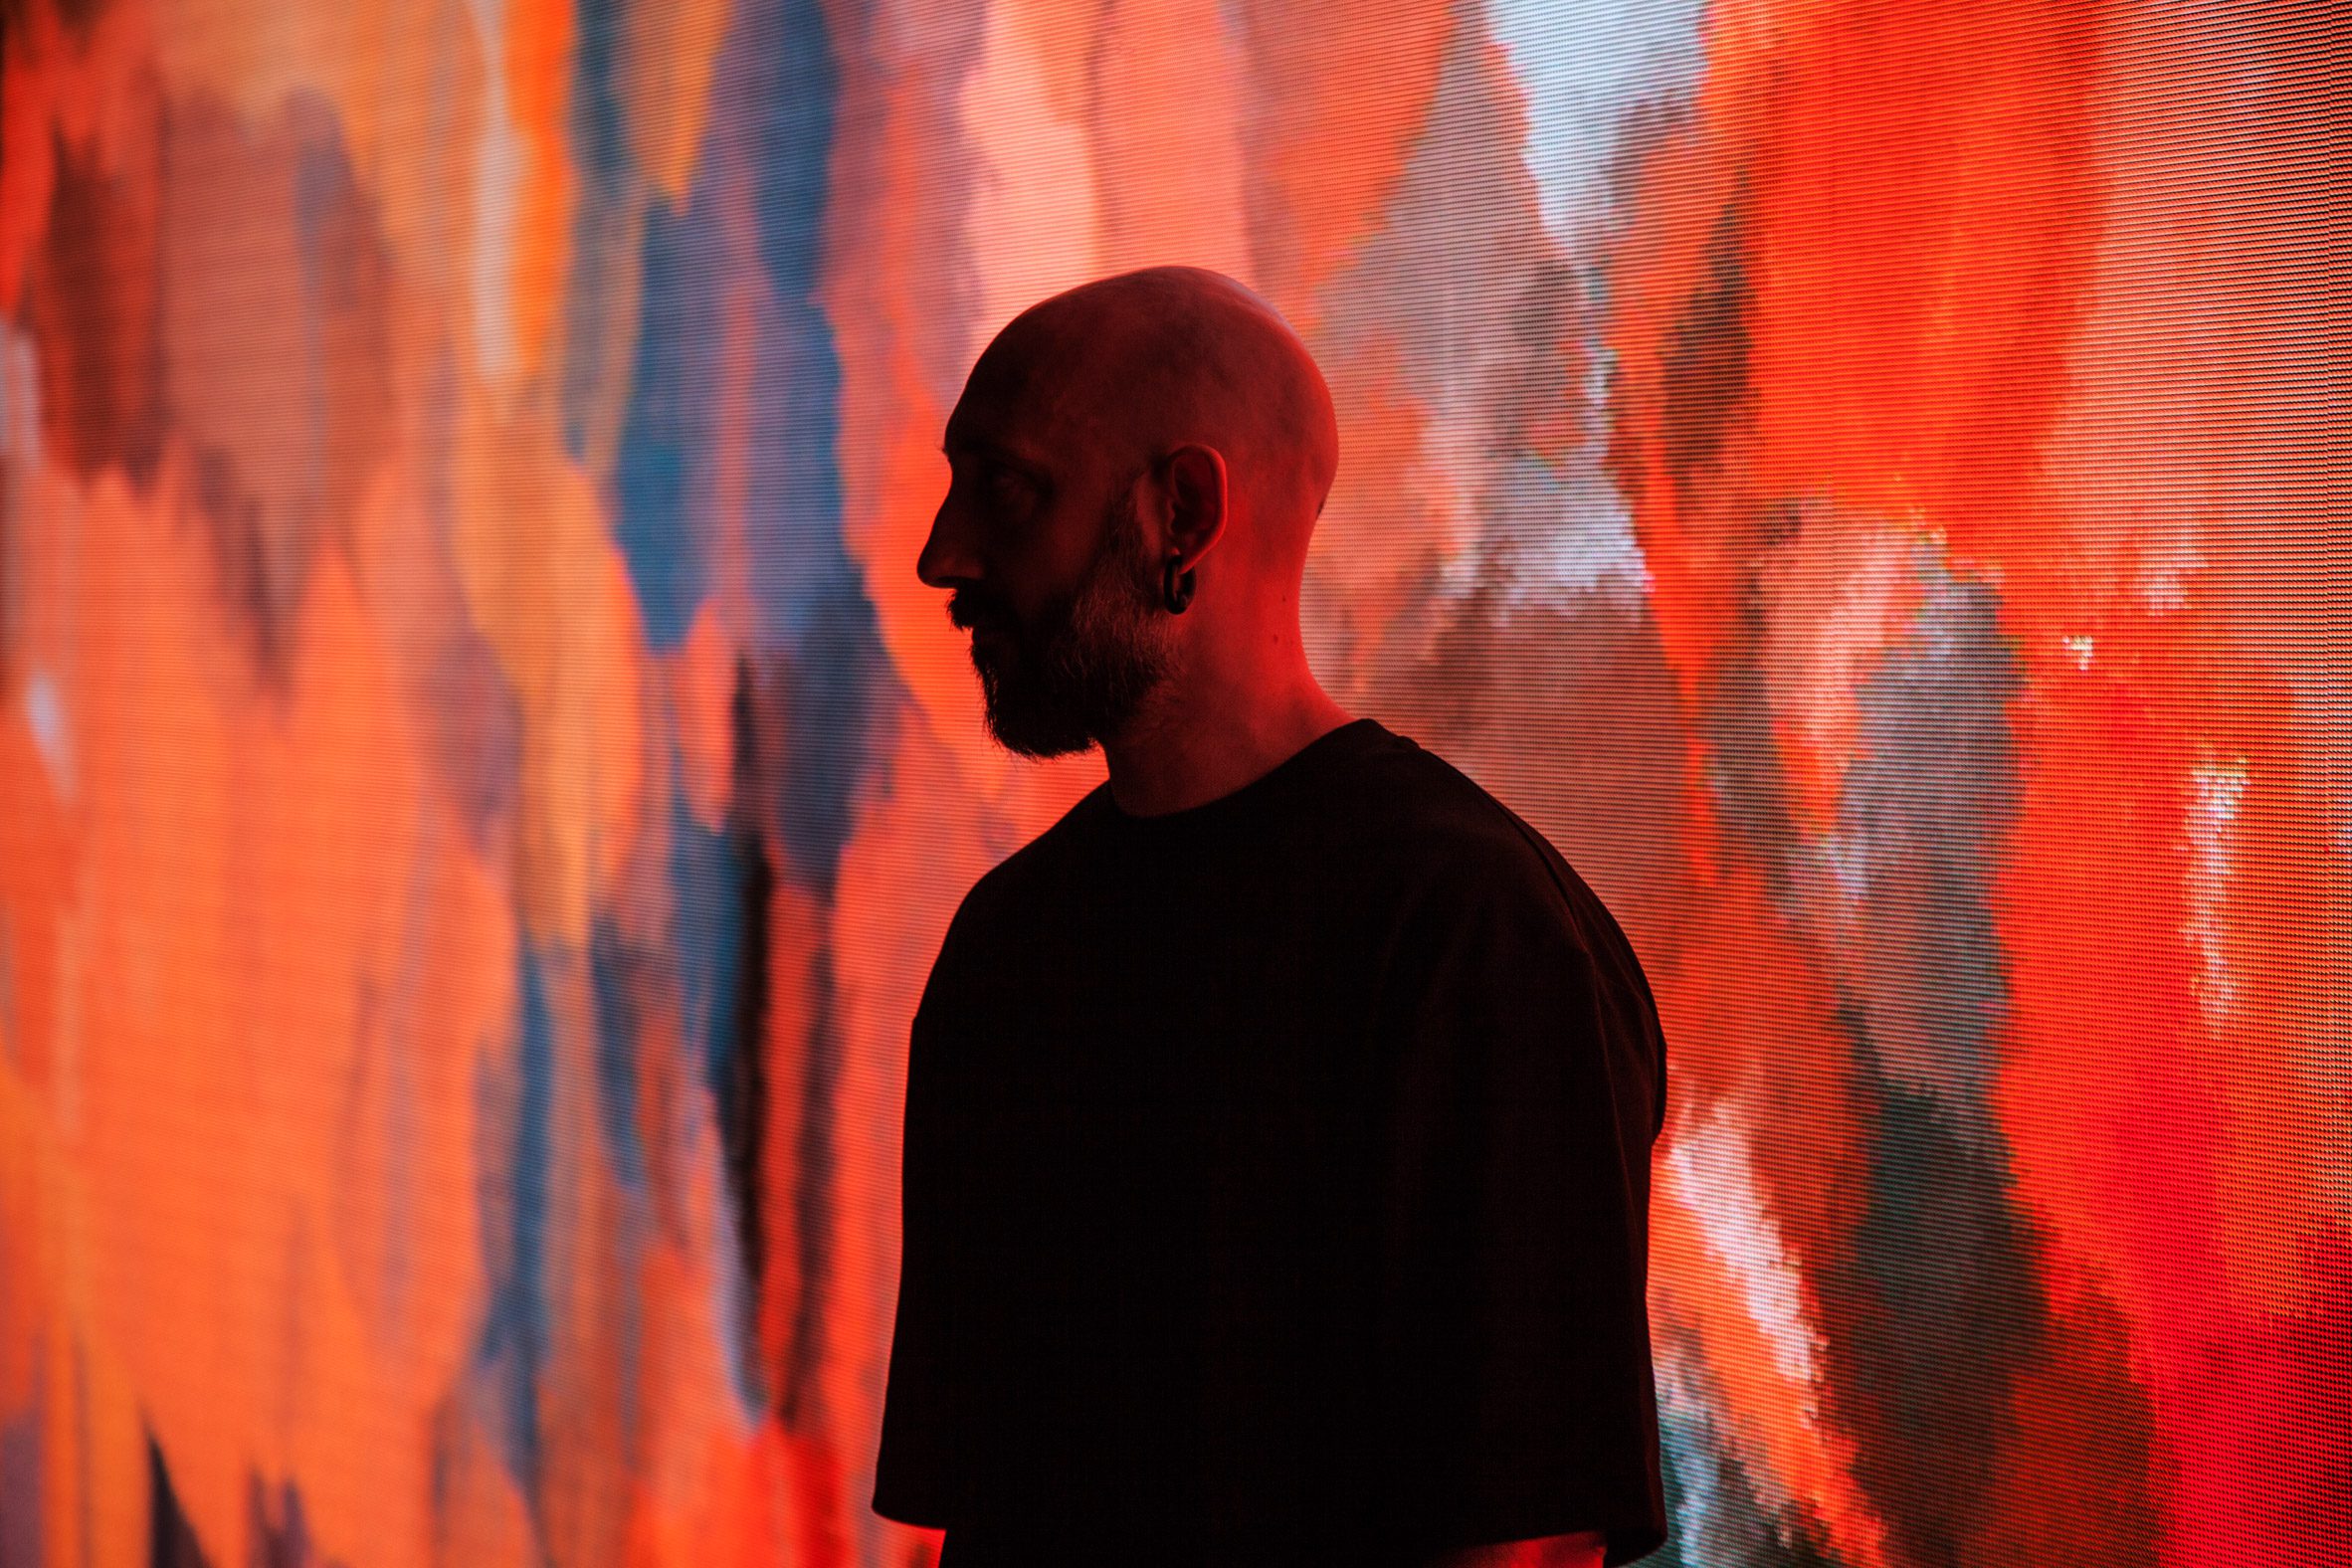 Headshot of the artist Quayola in shadow with his head held close to one of his artworks